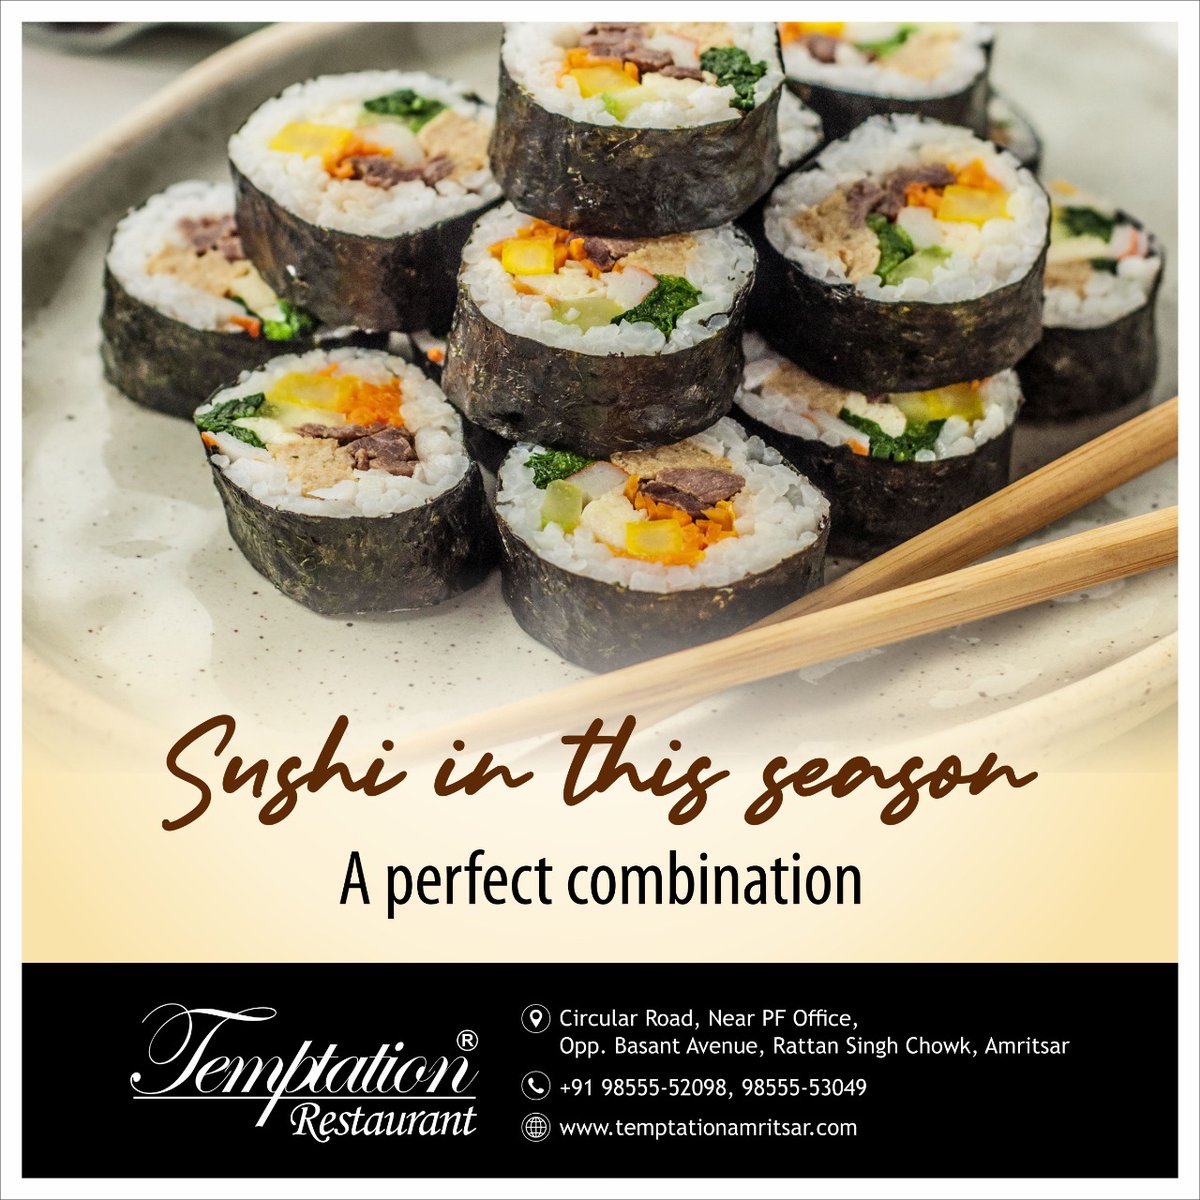 SUSHI 🍣 IN THIS SEASON
“PERFECT COMBINATION”

We are Open for DINE-IN

We are following all the Safety Protocols from end

For Taking Away Call us: +91-9855552098

#GoodFoodGoodMood #Sushi #SushiLovers #DimSum #DimSumsLover #MultiCuisineFood #ChineseLovers #TotalIndianFood